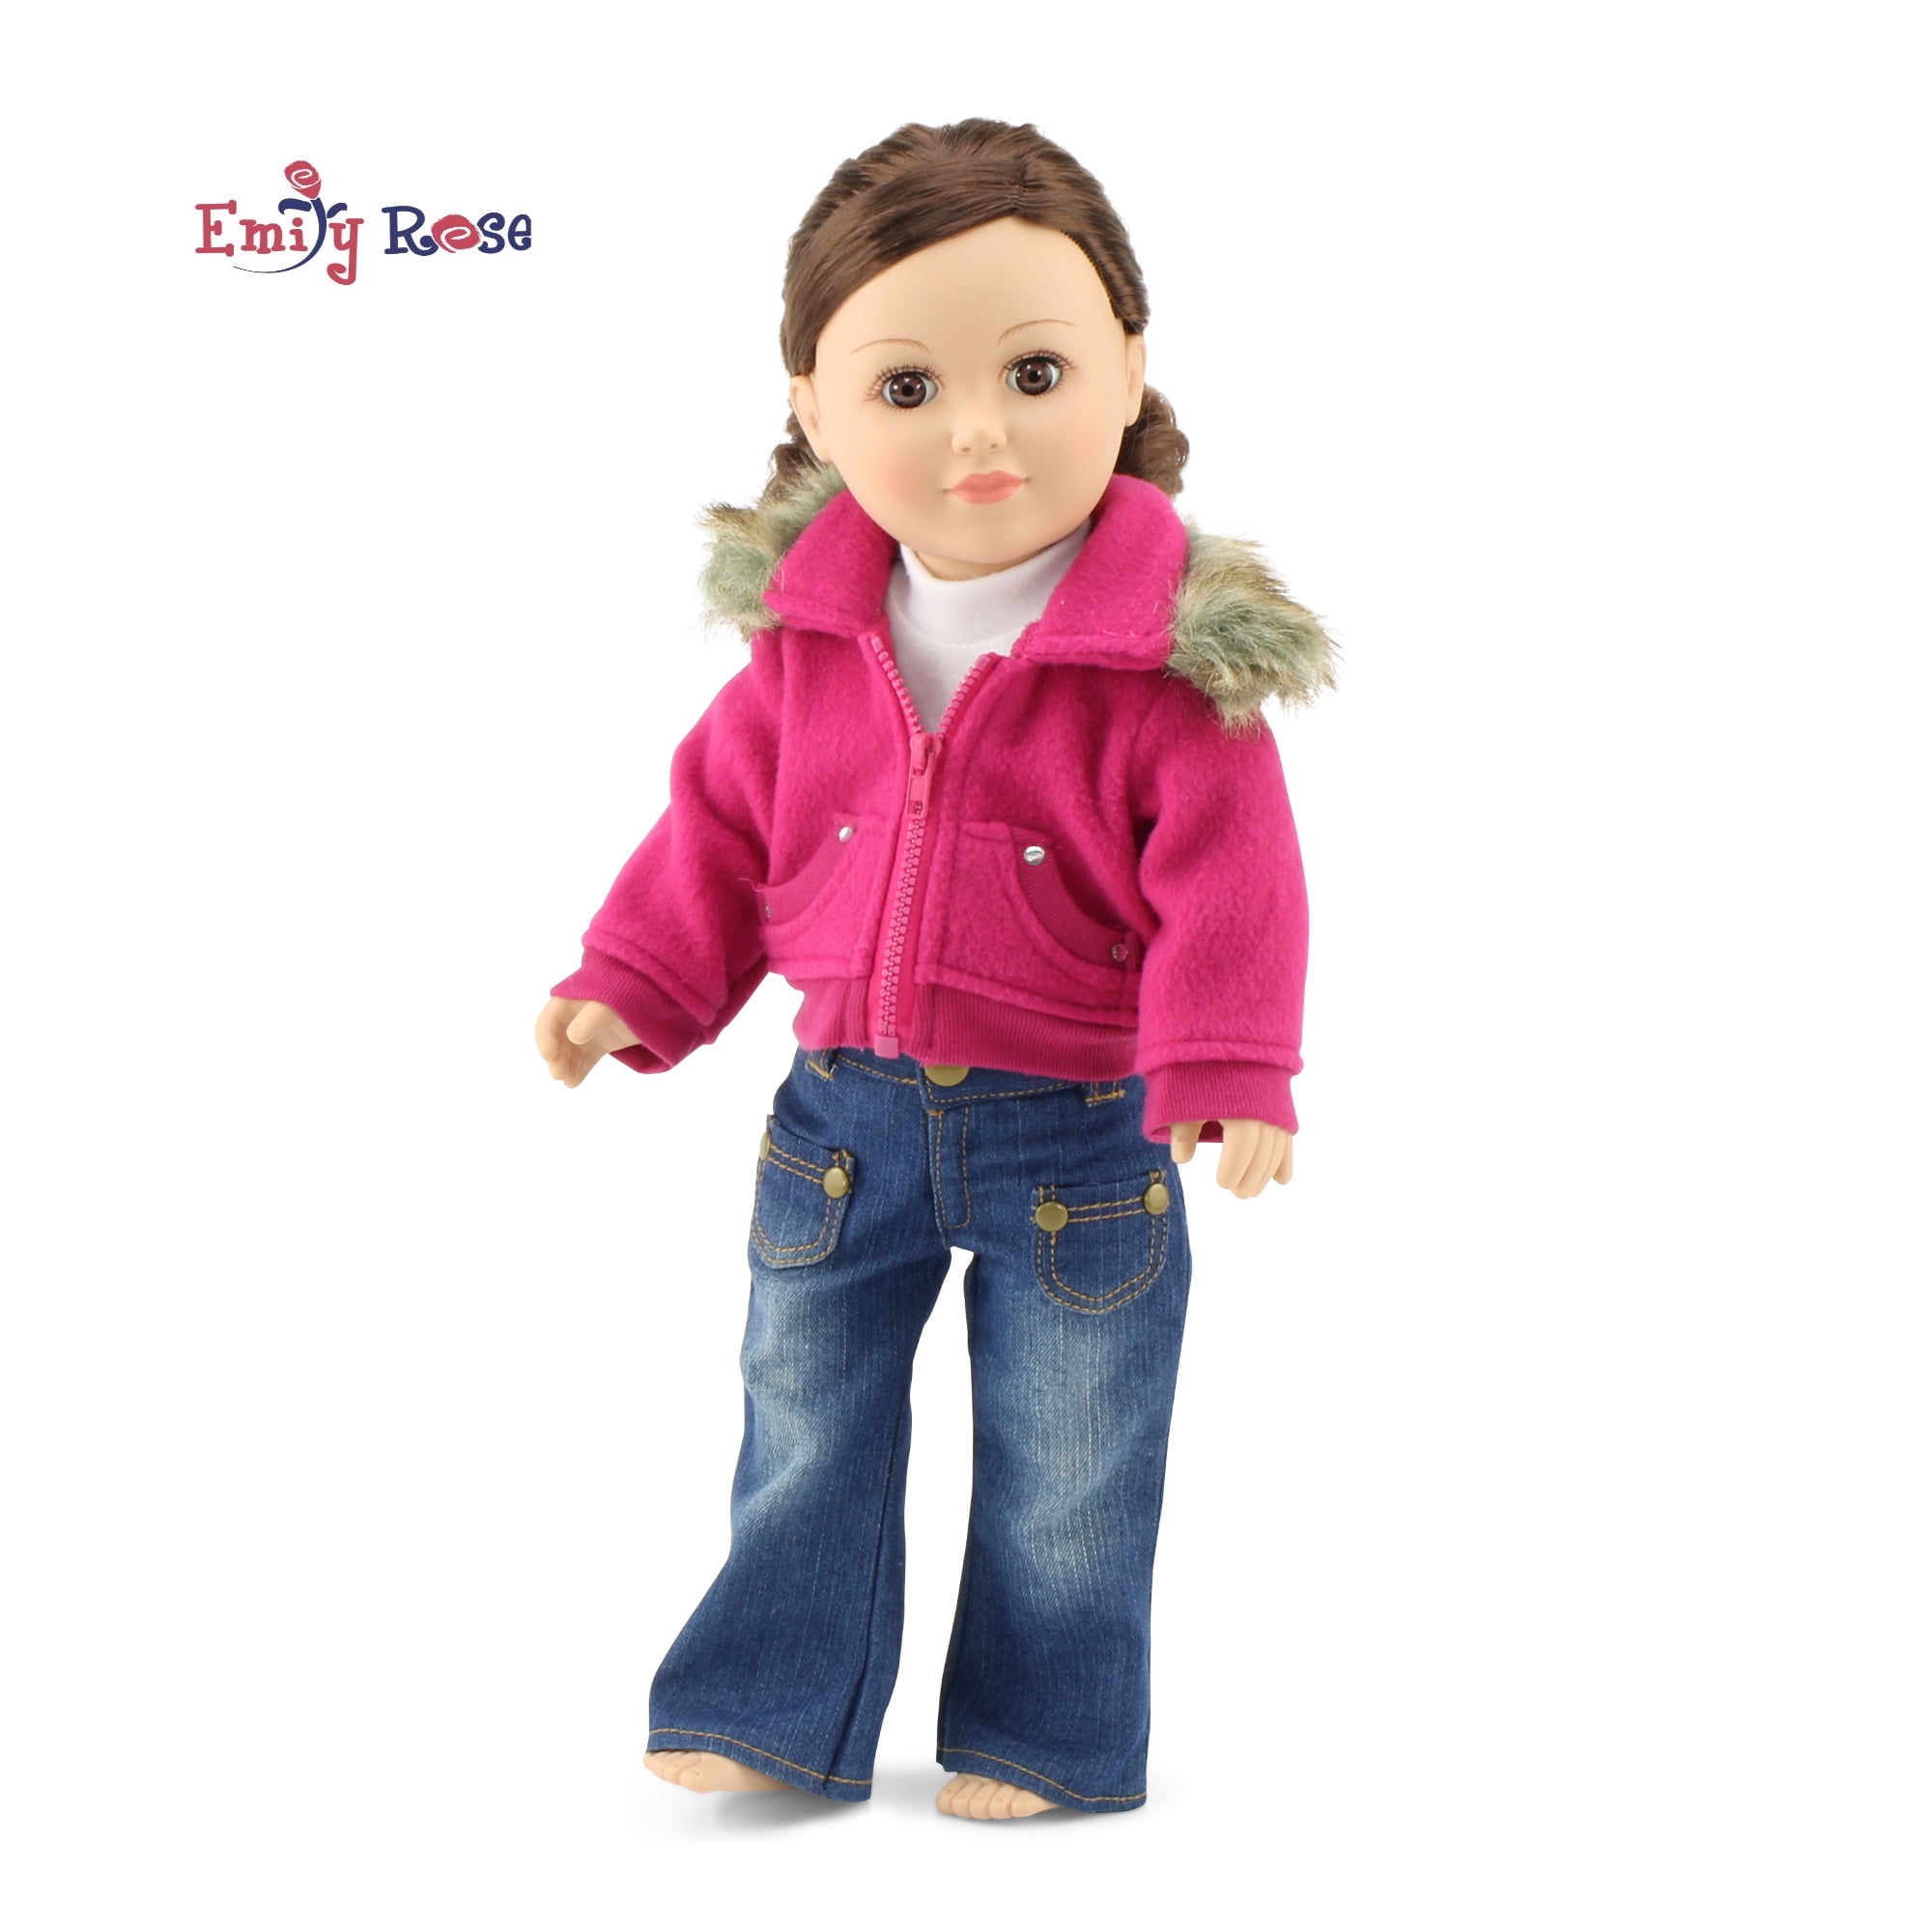 Emily Rose Doll Clothes 18 inch Doll FurnitureBrightly Colored Wooden 